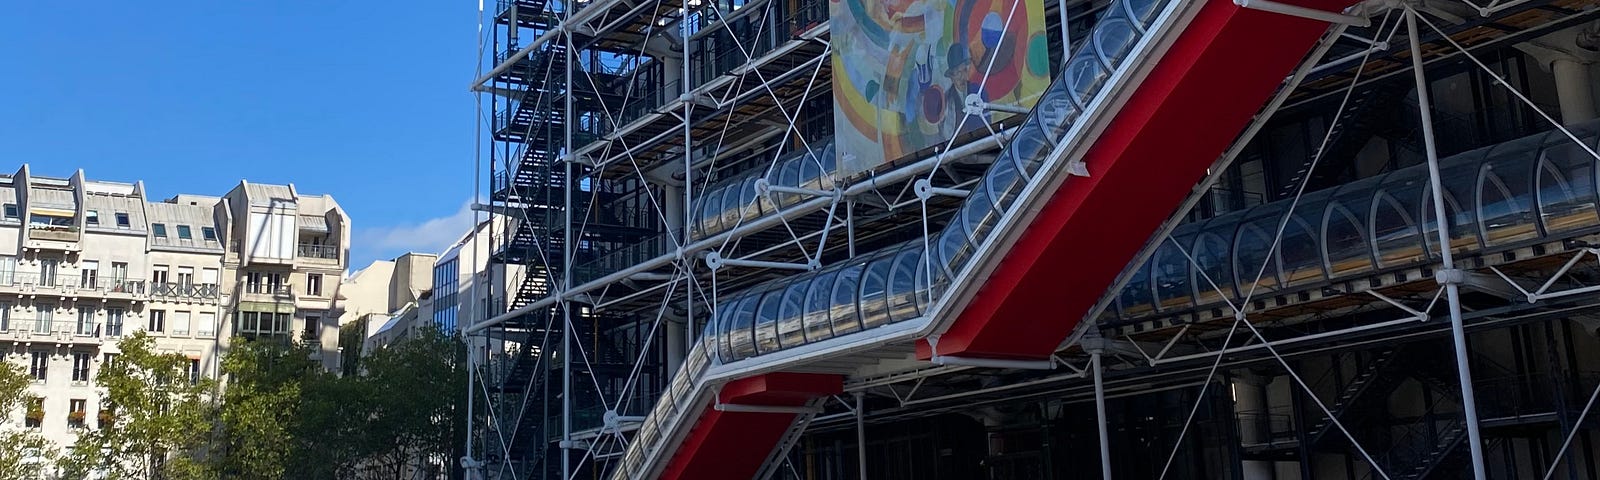 Photography that represent the center Geogres Pompidou, in 19 Rue Beaubourg, 75004 Paris. We can see the outstanding architecture of the 10 levels and 7,500 m2 building. There is a very strong presence of four strong colors — blue, red, yellow and green — that enliven its facades and dress its structure, according to a “code” defined by the architects.